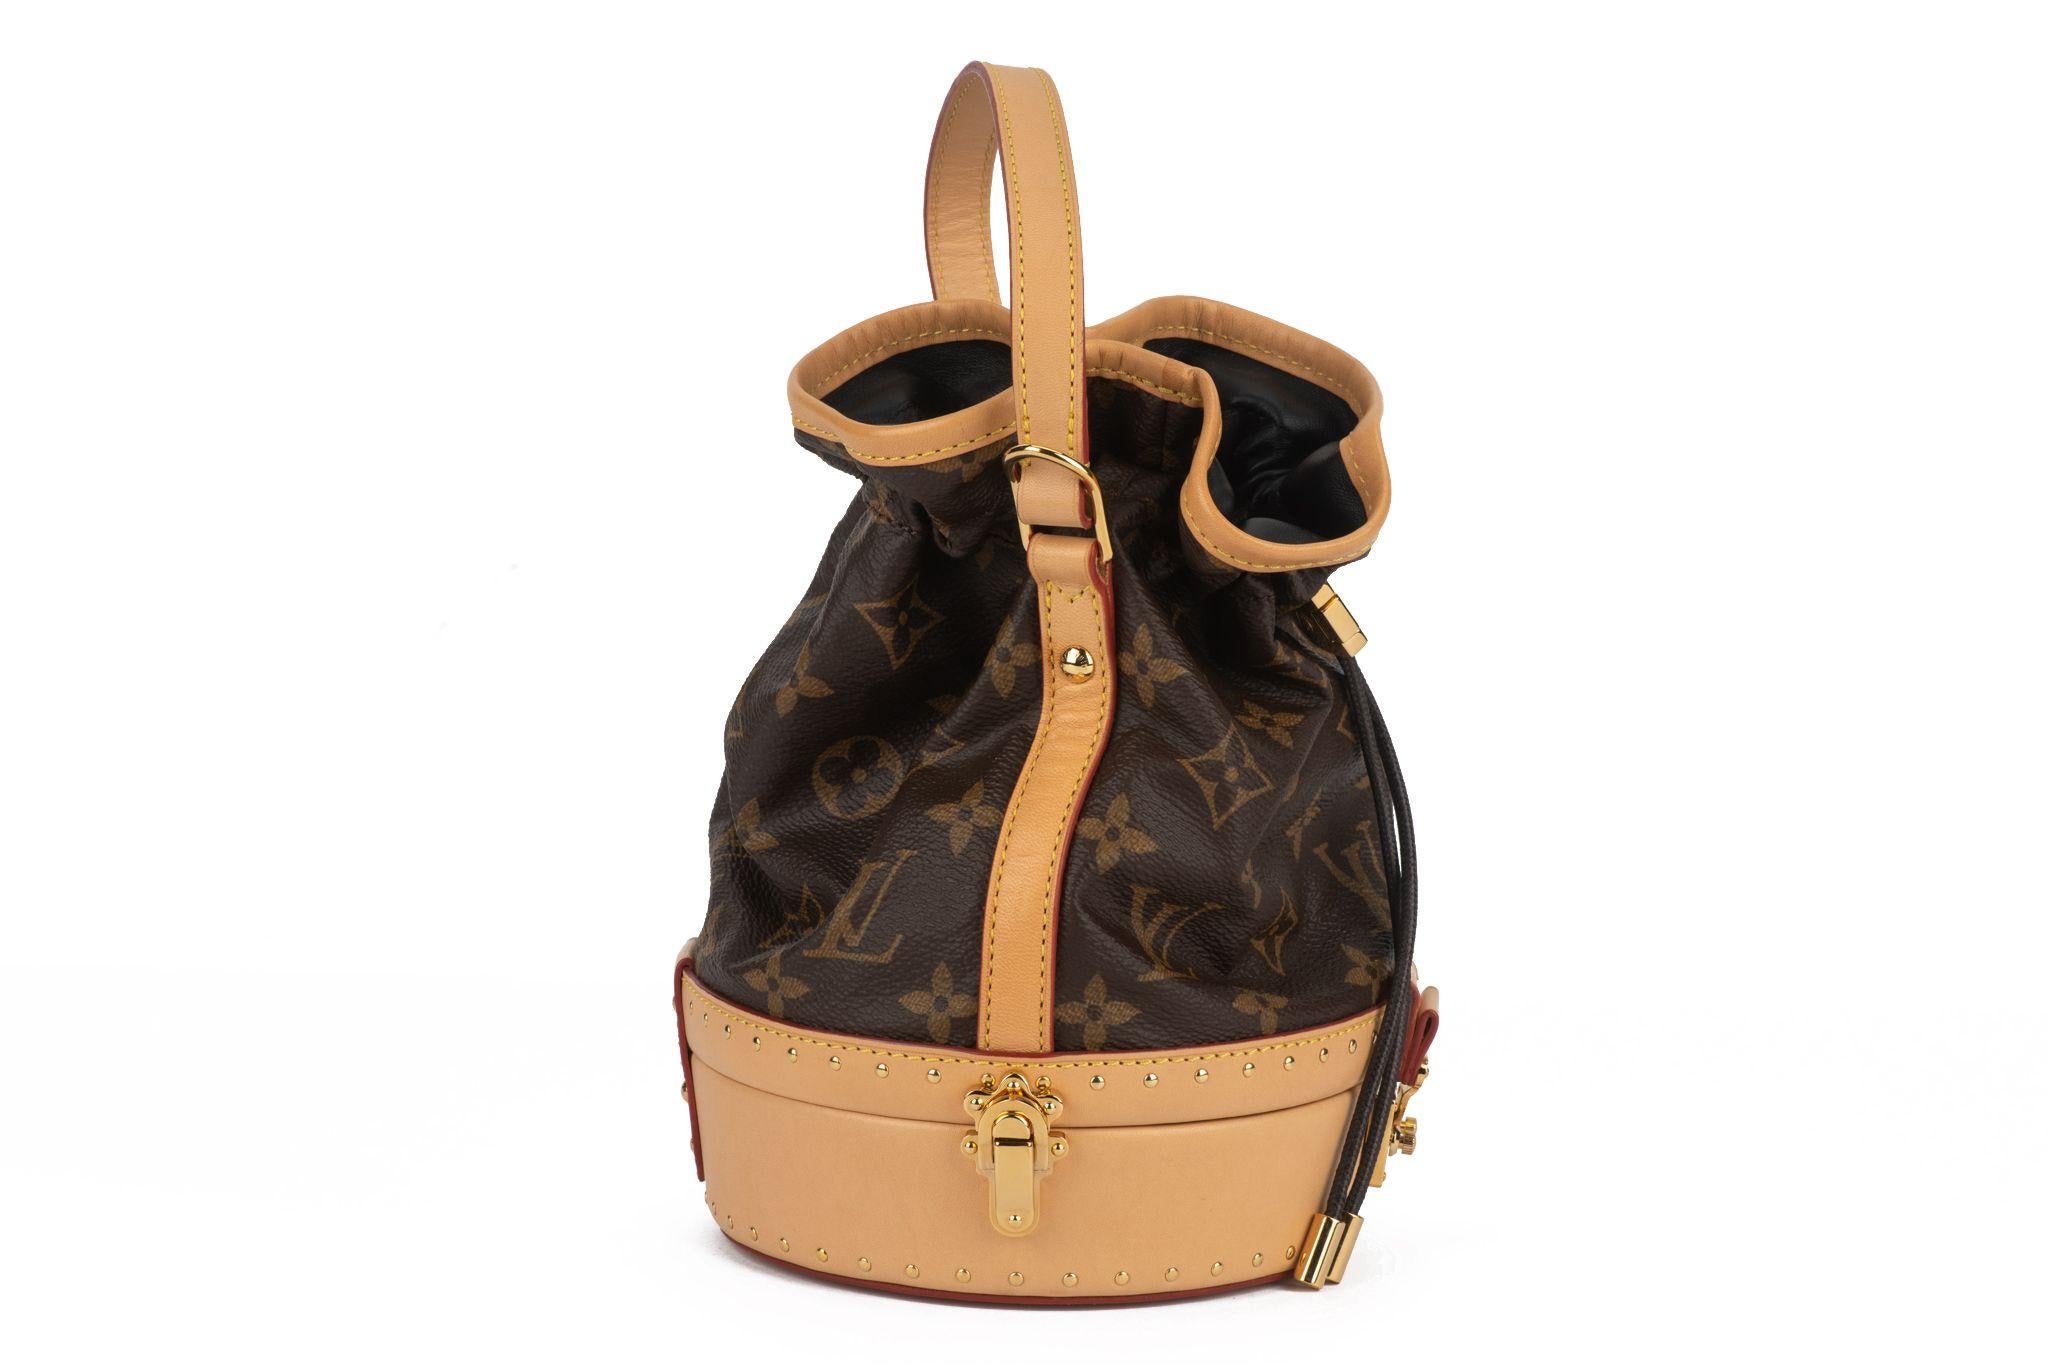 Louis Vuitton Petit Noe Trunk Bag In New Condition For Sale In West Hollywood, CA